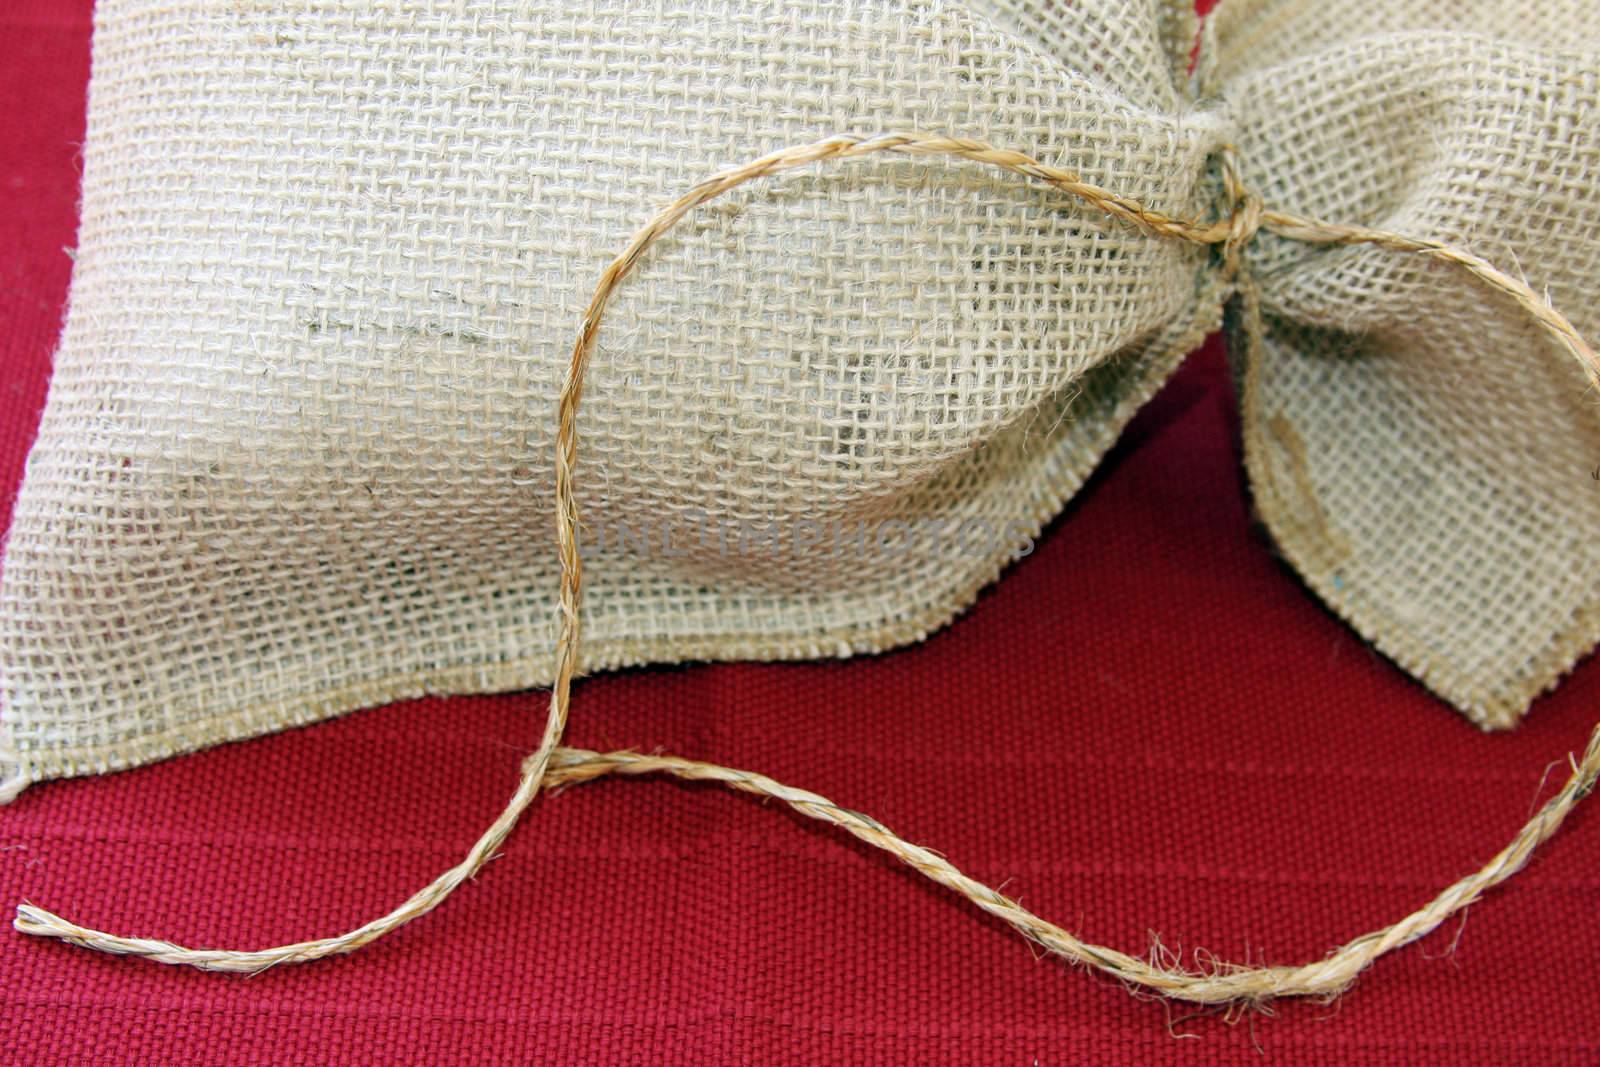 Burlap bag on red texture